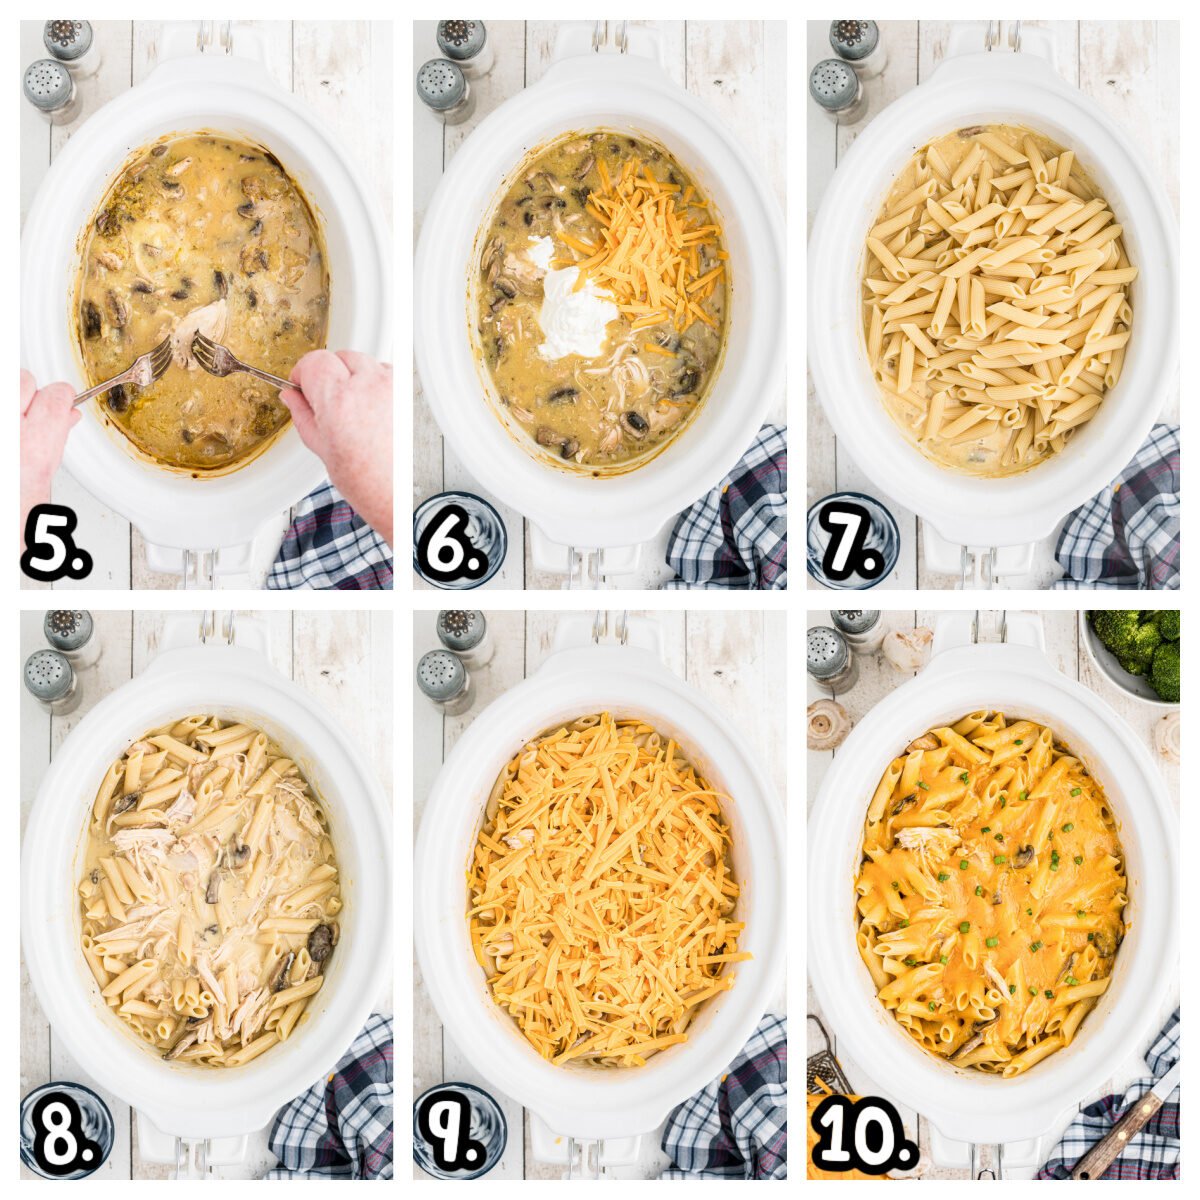 6 images about how to shred chicken, add sour cream, cheese and pasta to slow cooker. Top with more cheese.